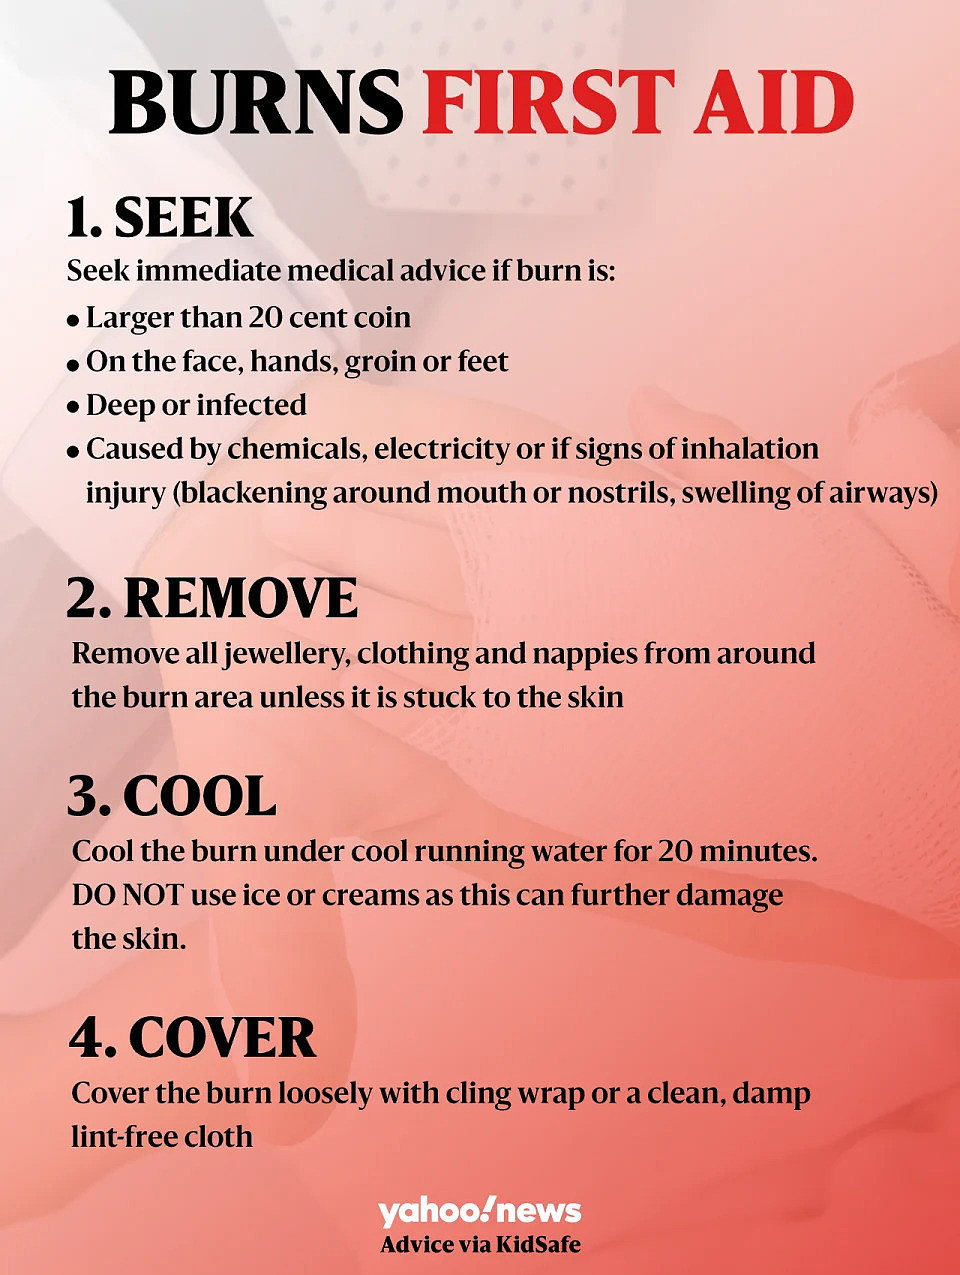 The image has a red background, with 1. Seek Assistance. 2. Remove clothing and jewellery. 3. Cool the burn with cool running water for 20 minutes. 4. Cover the burn loosely with cling wrap or a clean. damp lint-free cloth.